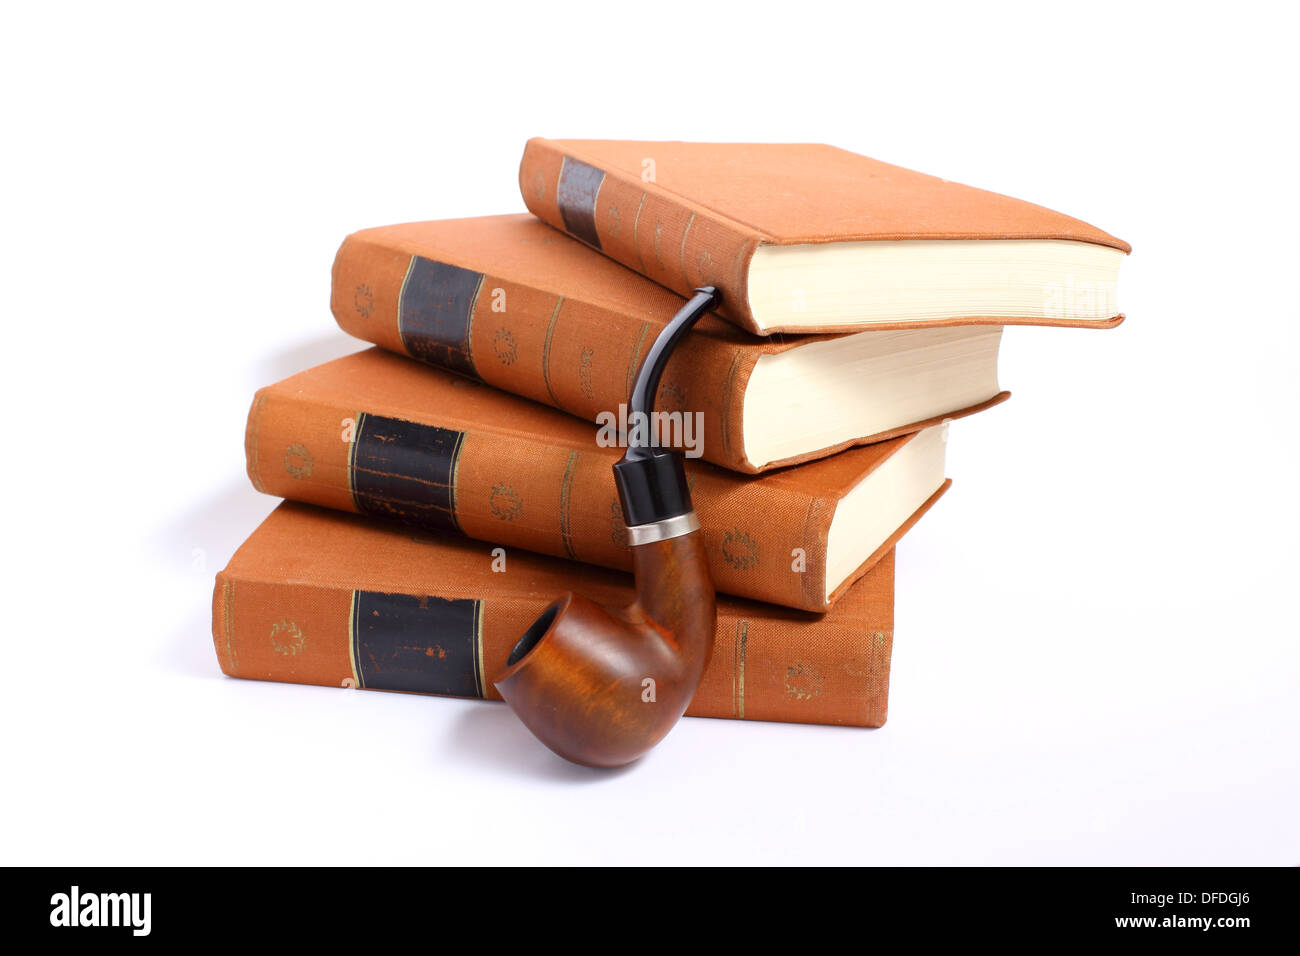 19th, background, book, books, brown, century, collection, data, education, hard, history, information, intellectual, isolated, Stock Photo